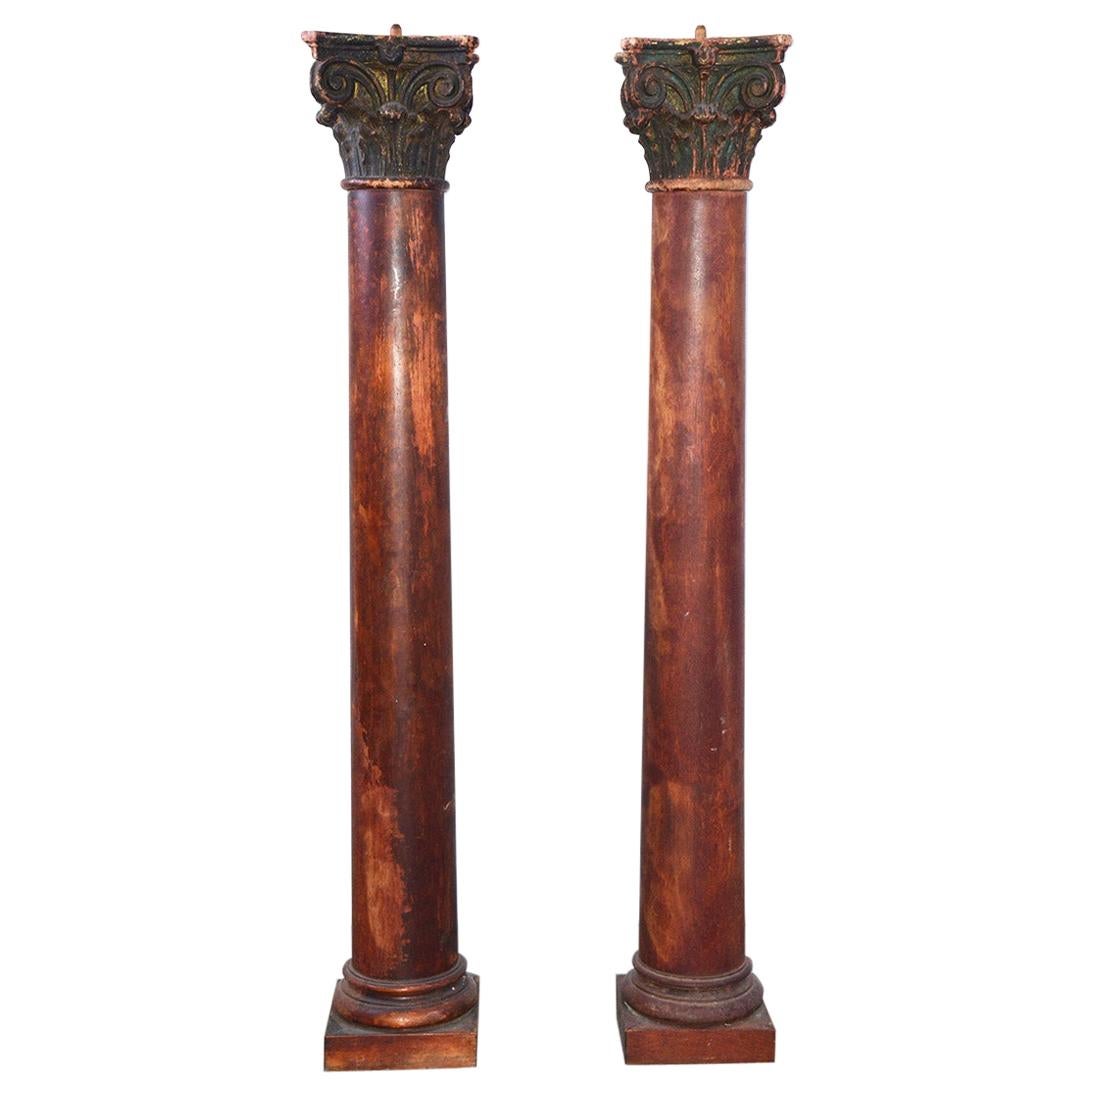 Pair of Painted Antique Columns with Corinthian Capitals